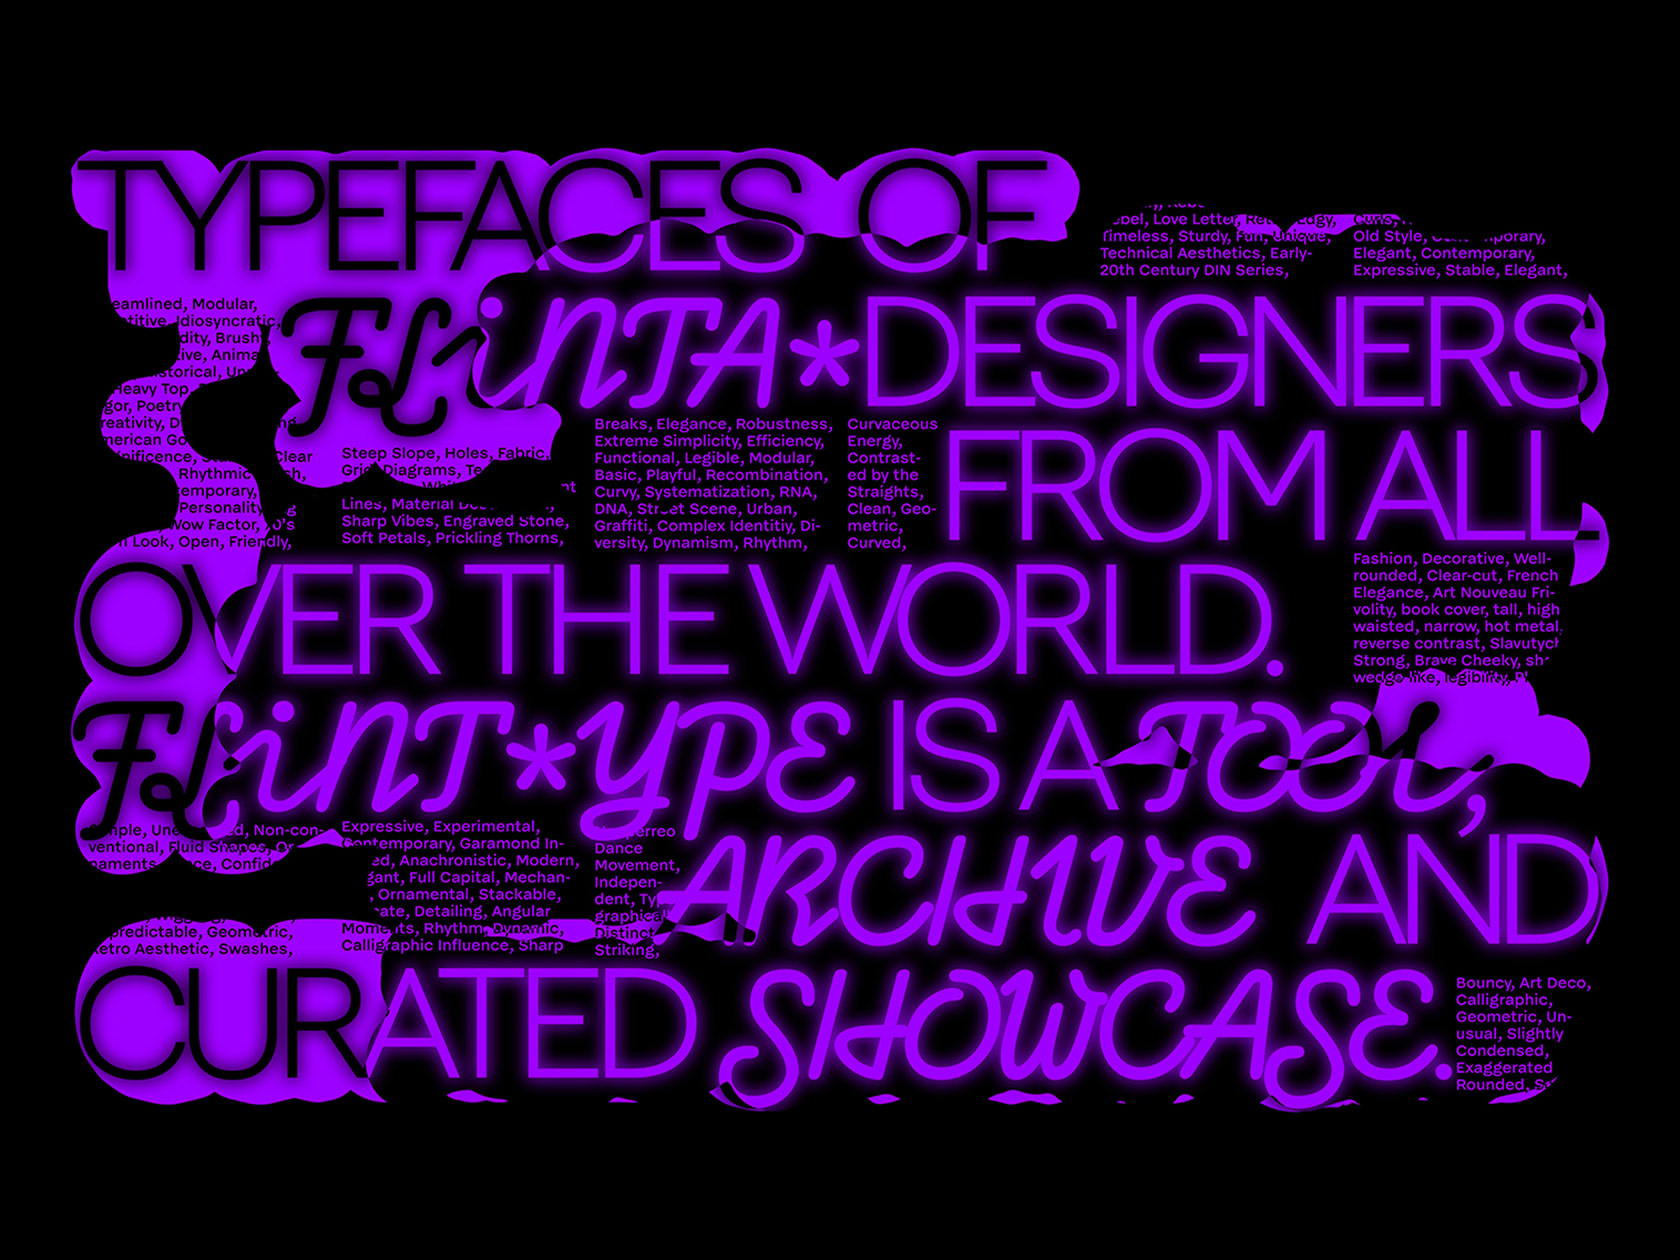 FLINT*ype aims to increase visibility and accessibility of typefaces from FLINTA* designers from all over the globe